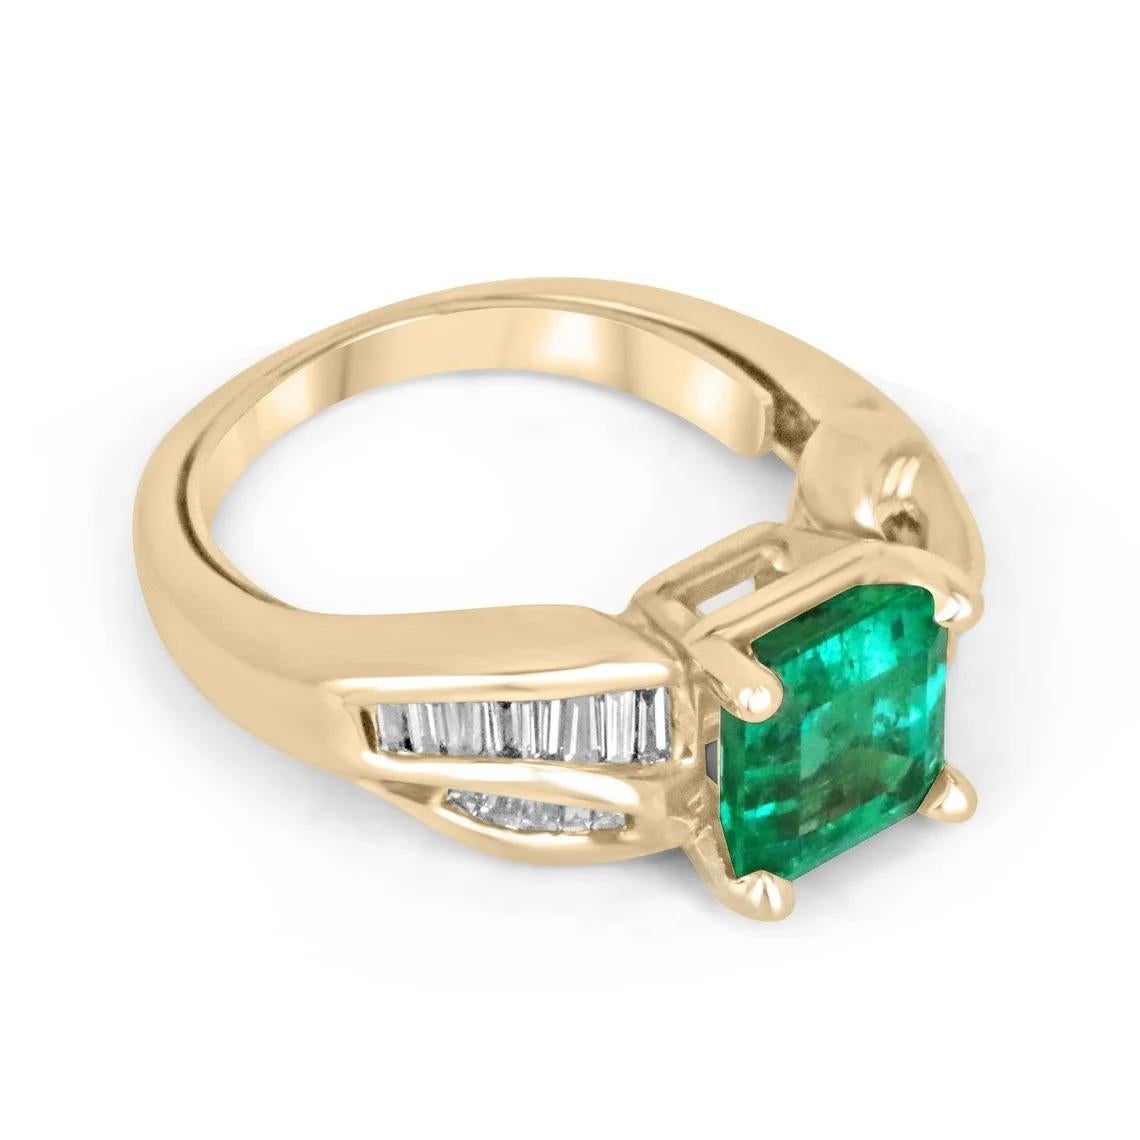 Celebrate the love of a lifetime with this captivating emerald and diamond engagement ring. At its center lies a mesmerizing 2.82-carat pure Colombian emerald, radiating an enchanting electric green color that captivates the heart. With remarkable